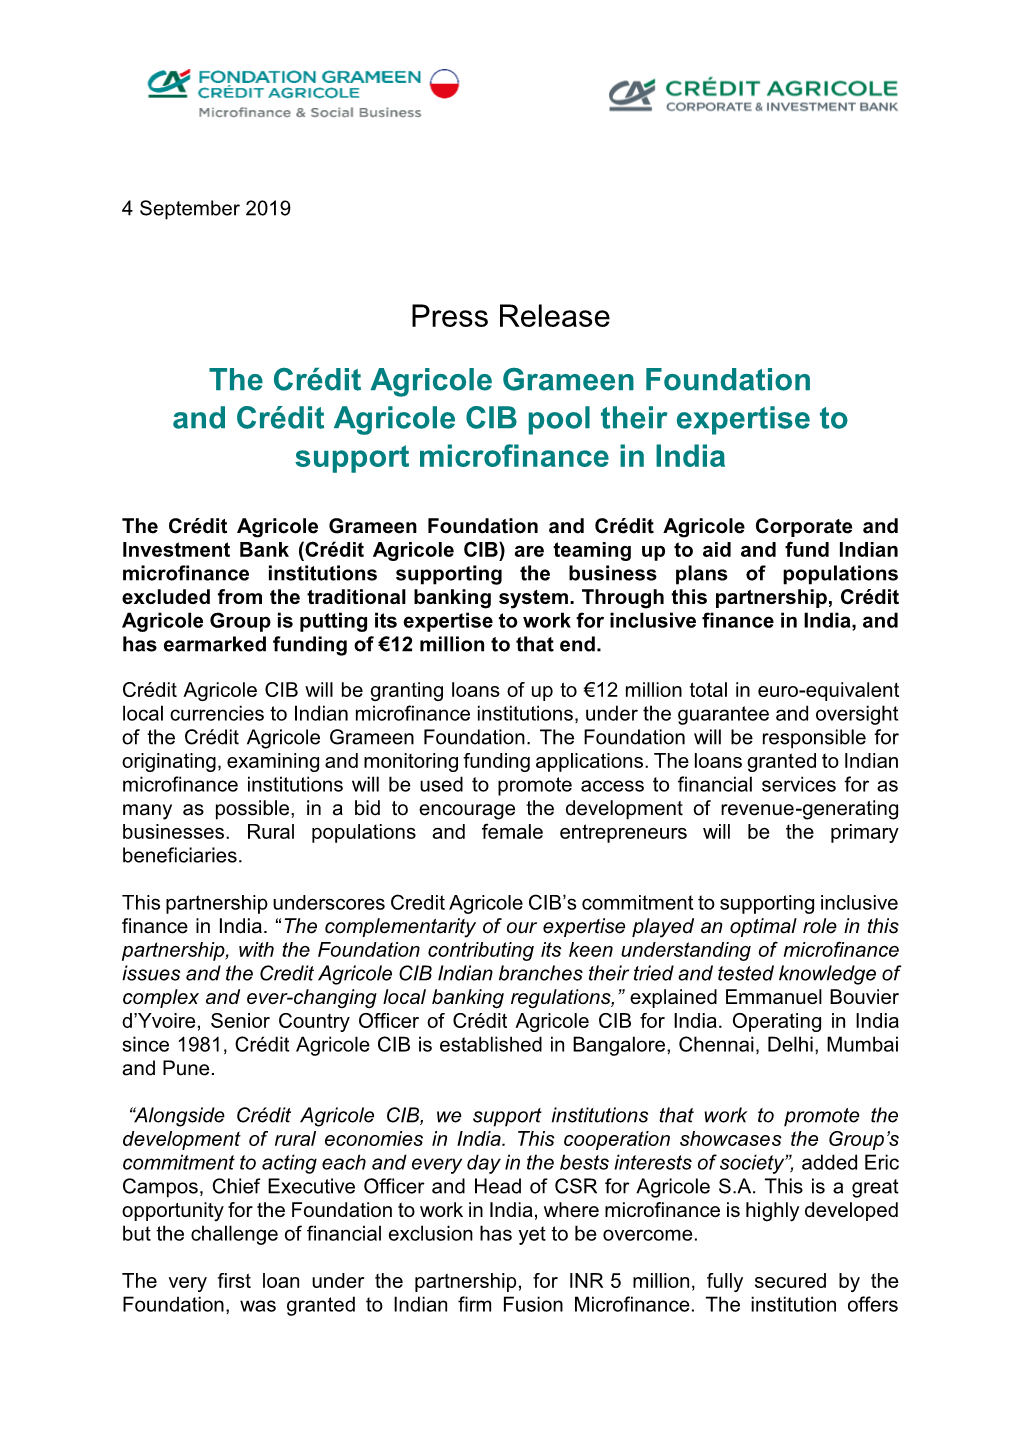 Press Release the Crédit Agricole Grameen Foundation and Crédit Agricole CIB Pool Their Expertise to Support Microfinance In